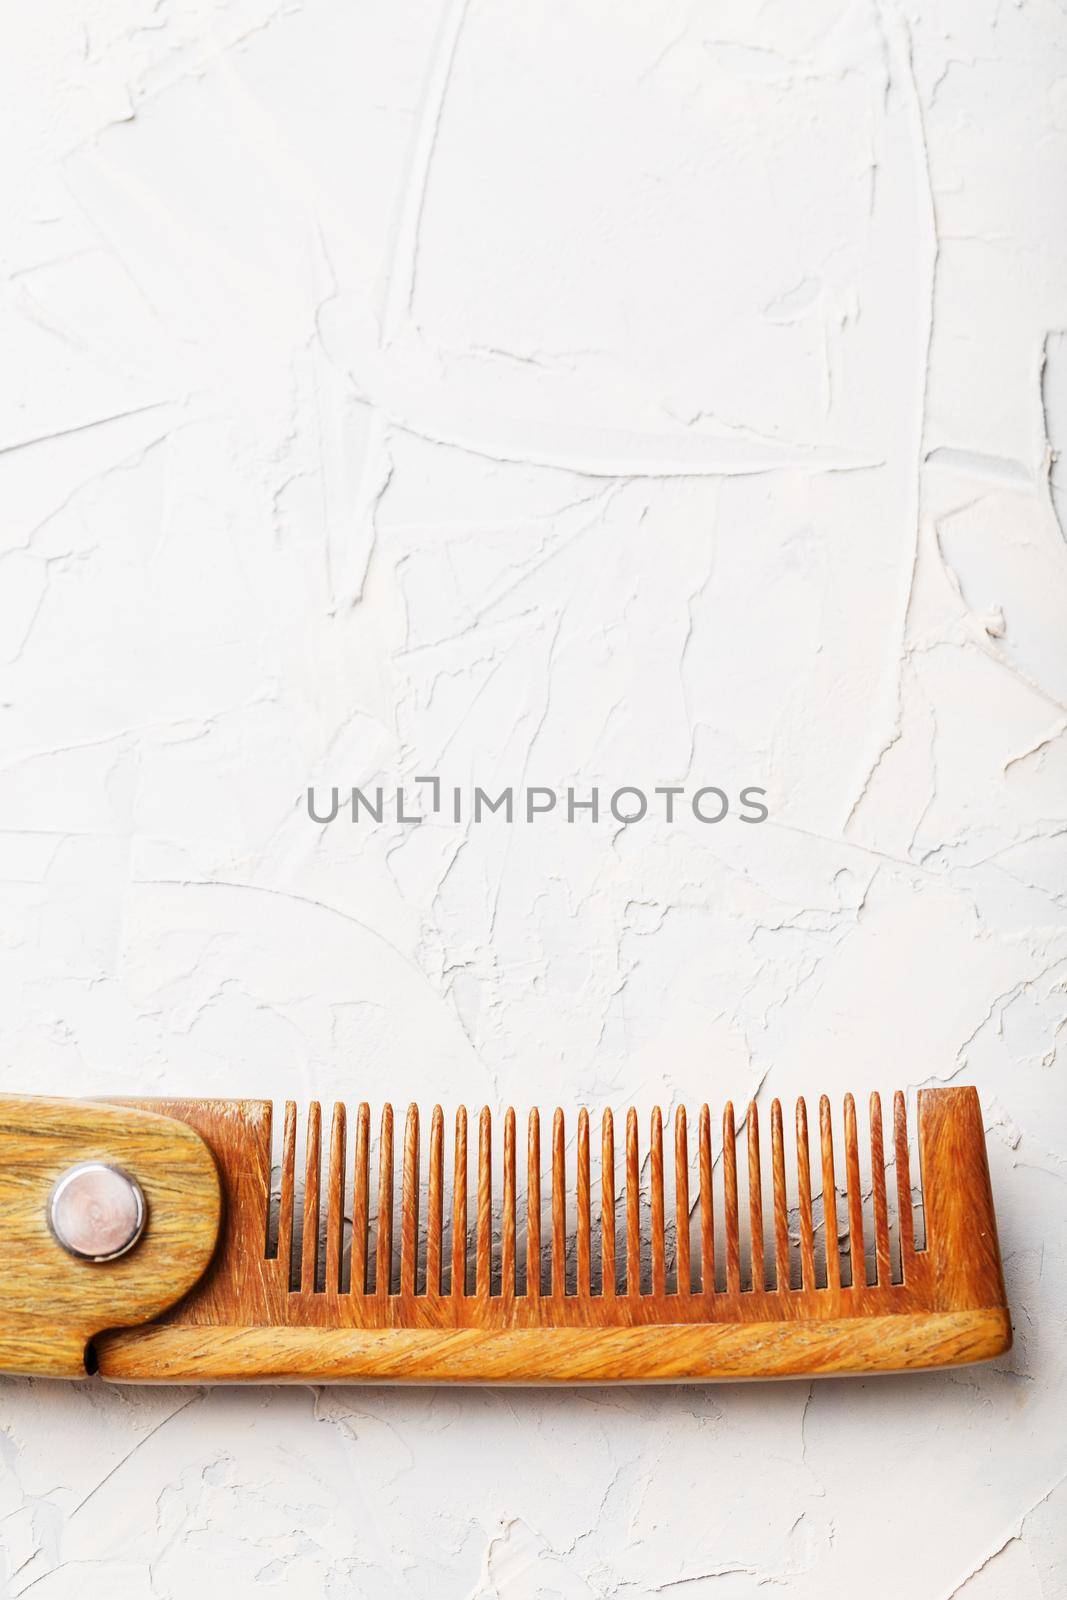 Wooden Sandalwood comb folding on a white textured background. Hair care. Isolate.